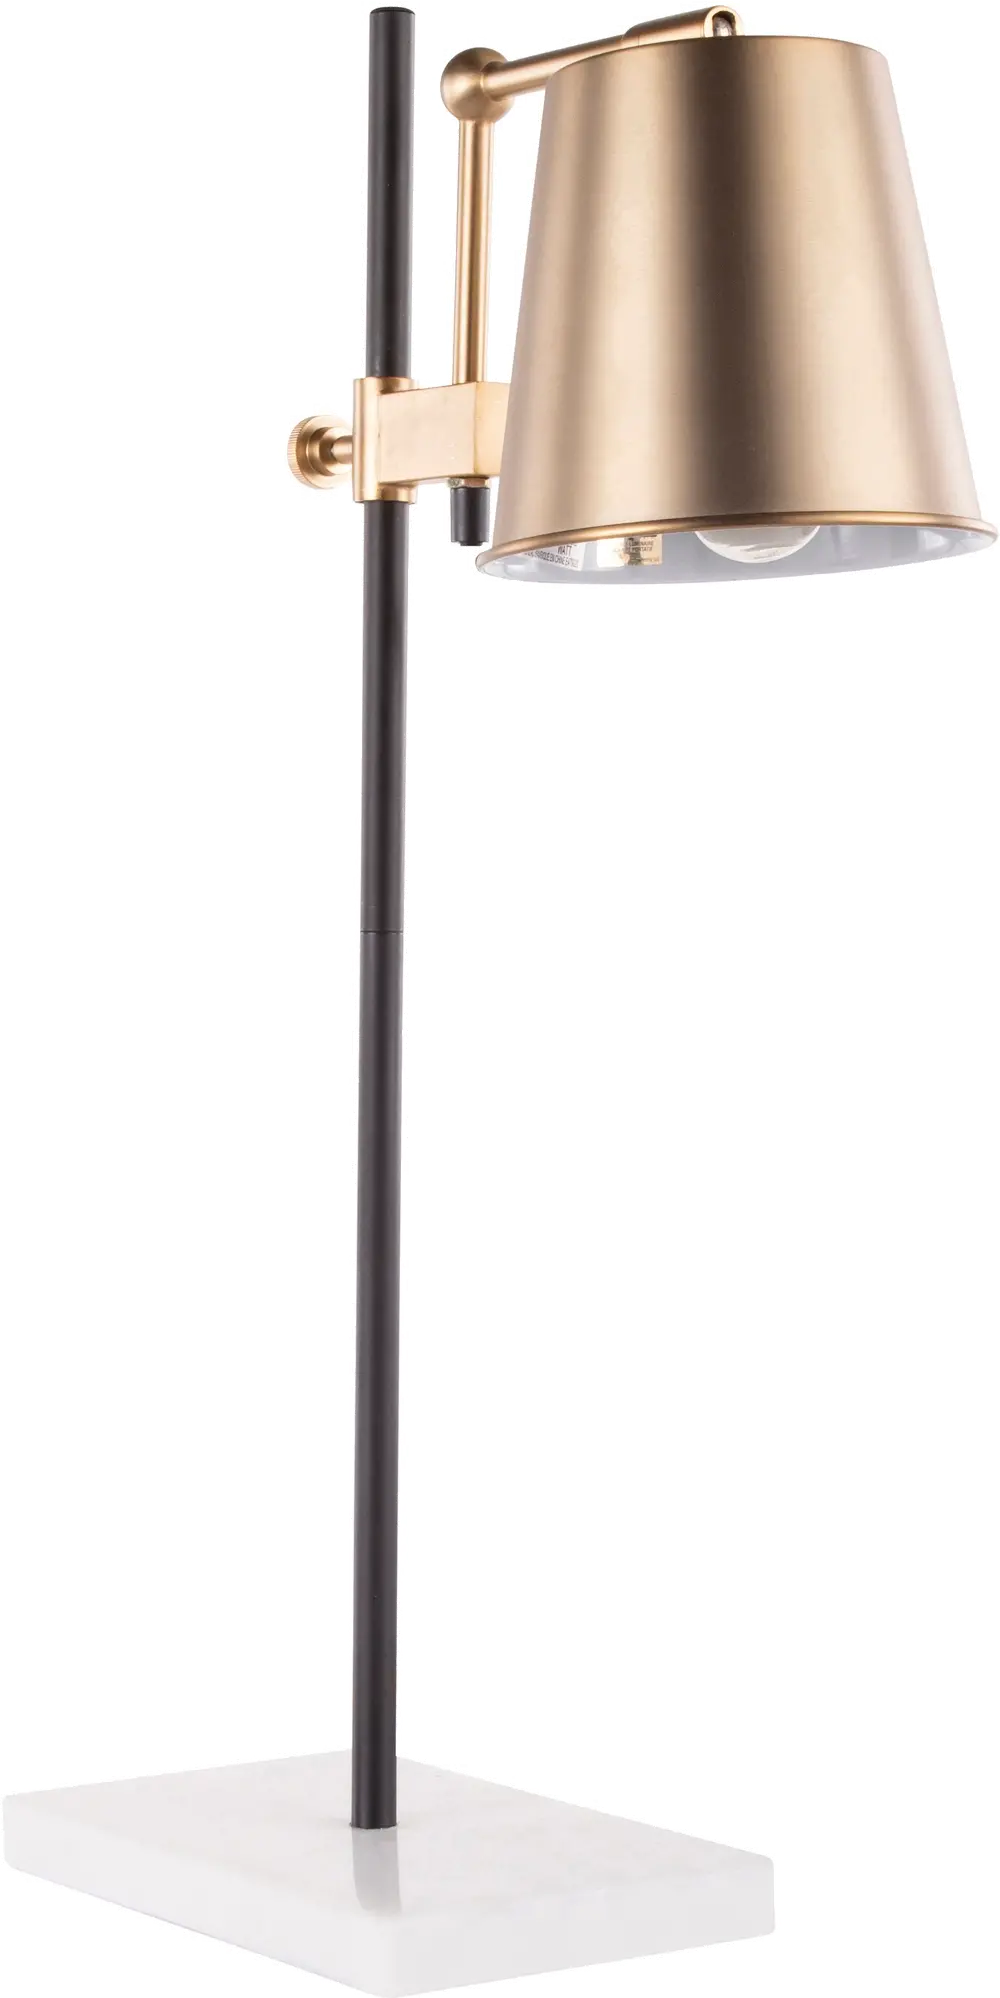 L-MTRCTB-AB Antique Brass and White Marble Industrial Table Lamp - Metric-1